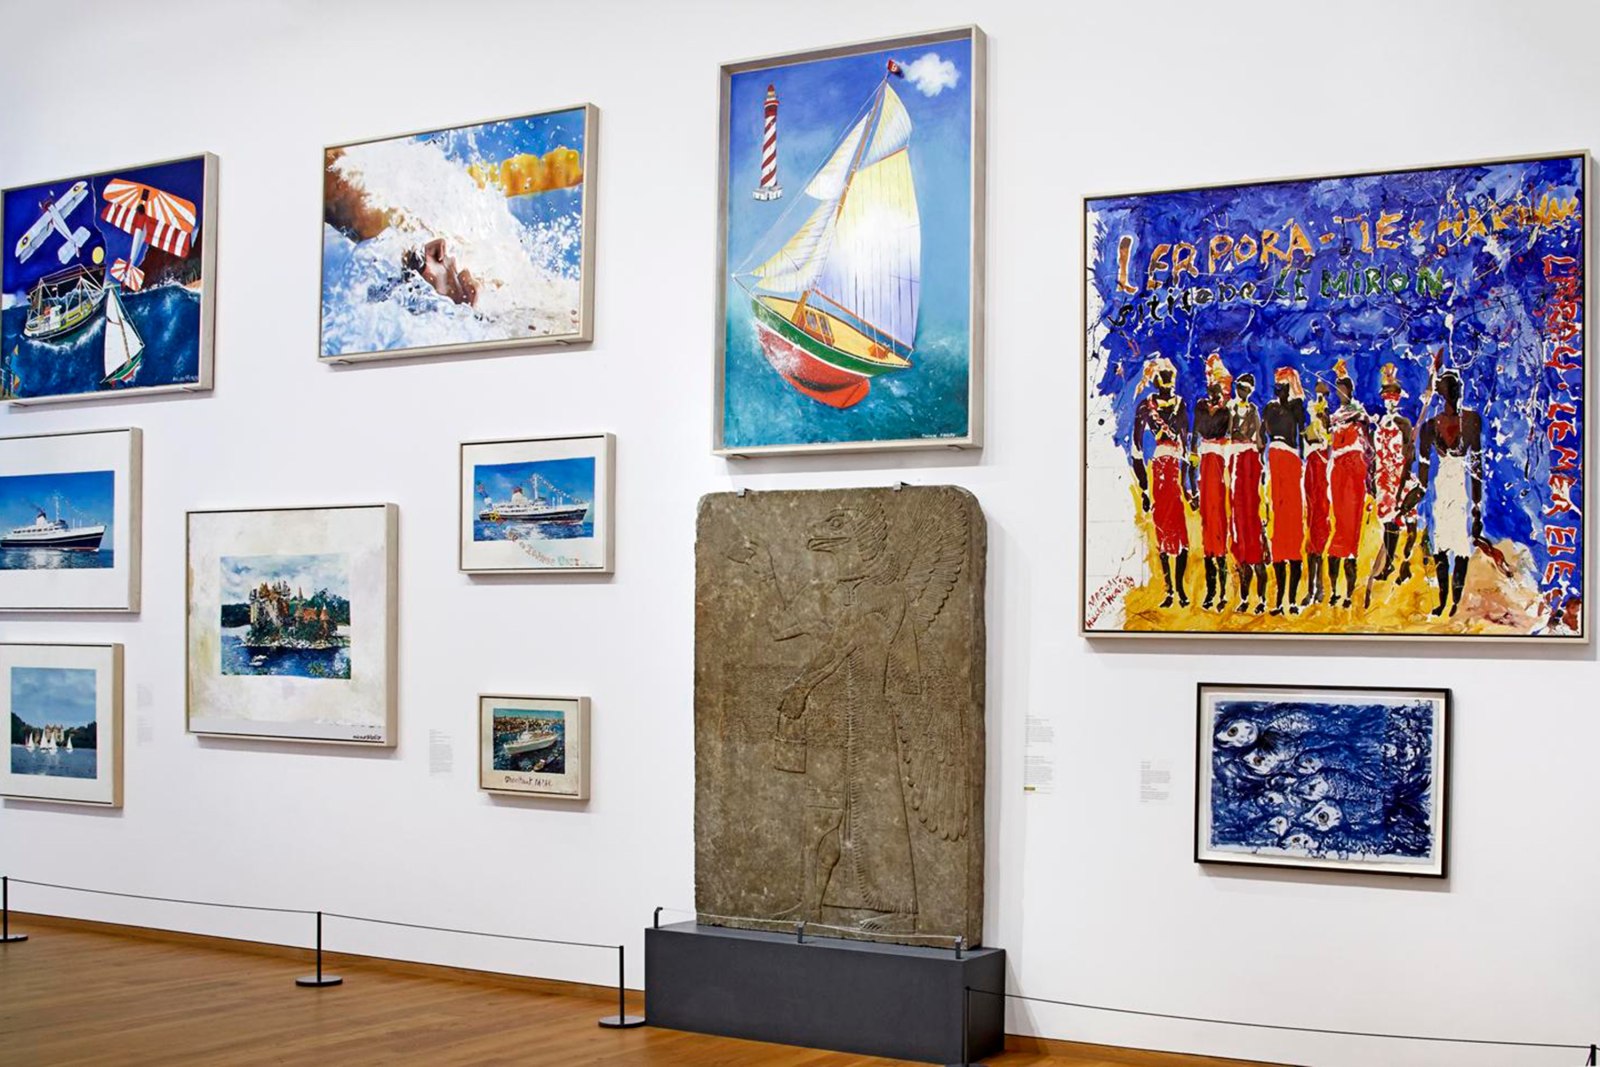 Installation view, Malcolm Morley at the Ashmolean: Paintings and Drawings from the Hall Collection, Ashmolean Museum of Art and Archaeology, University of Oxford, Oxford, UK, 2013